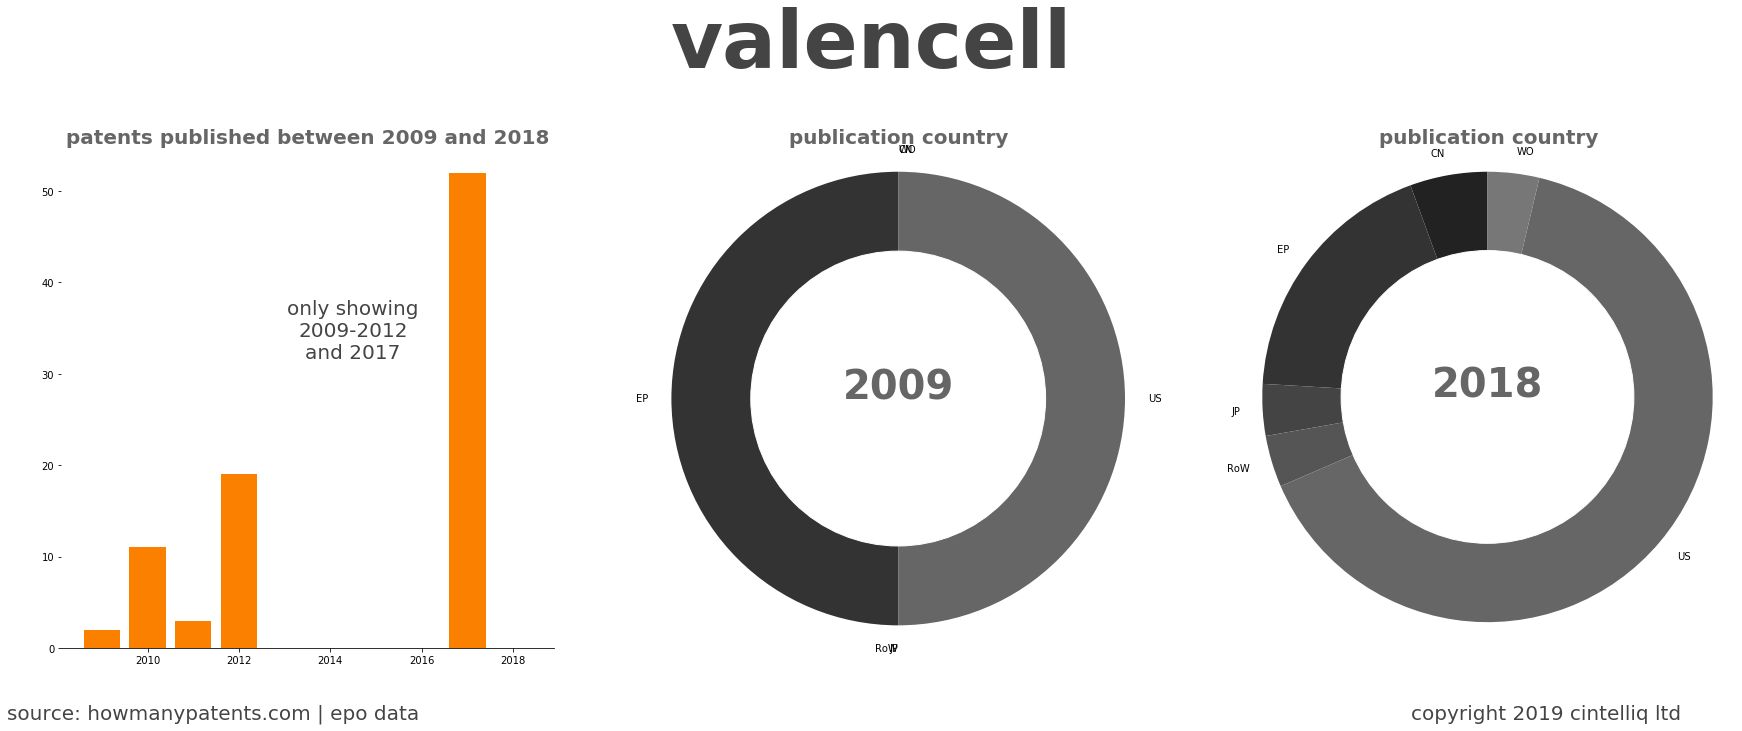 summary of patents for Valencell